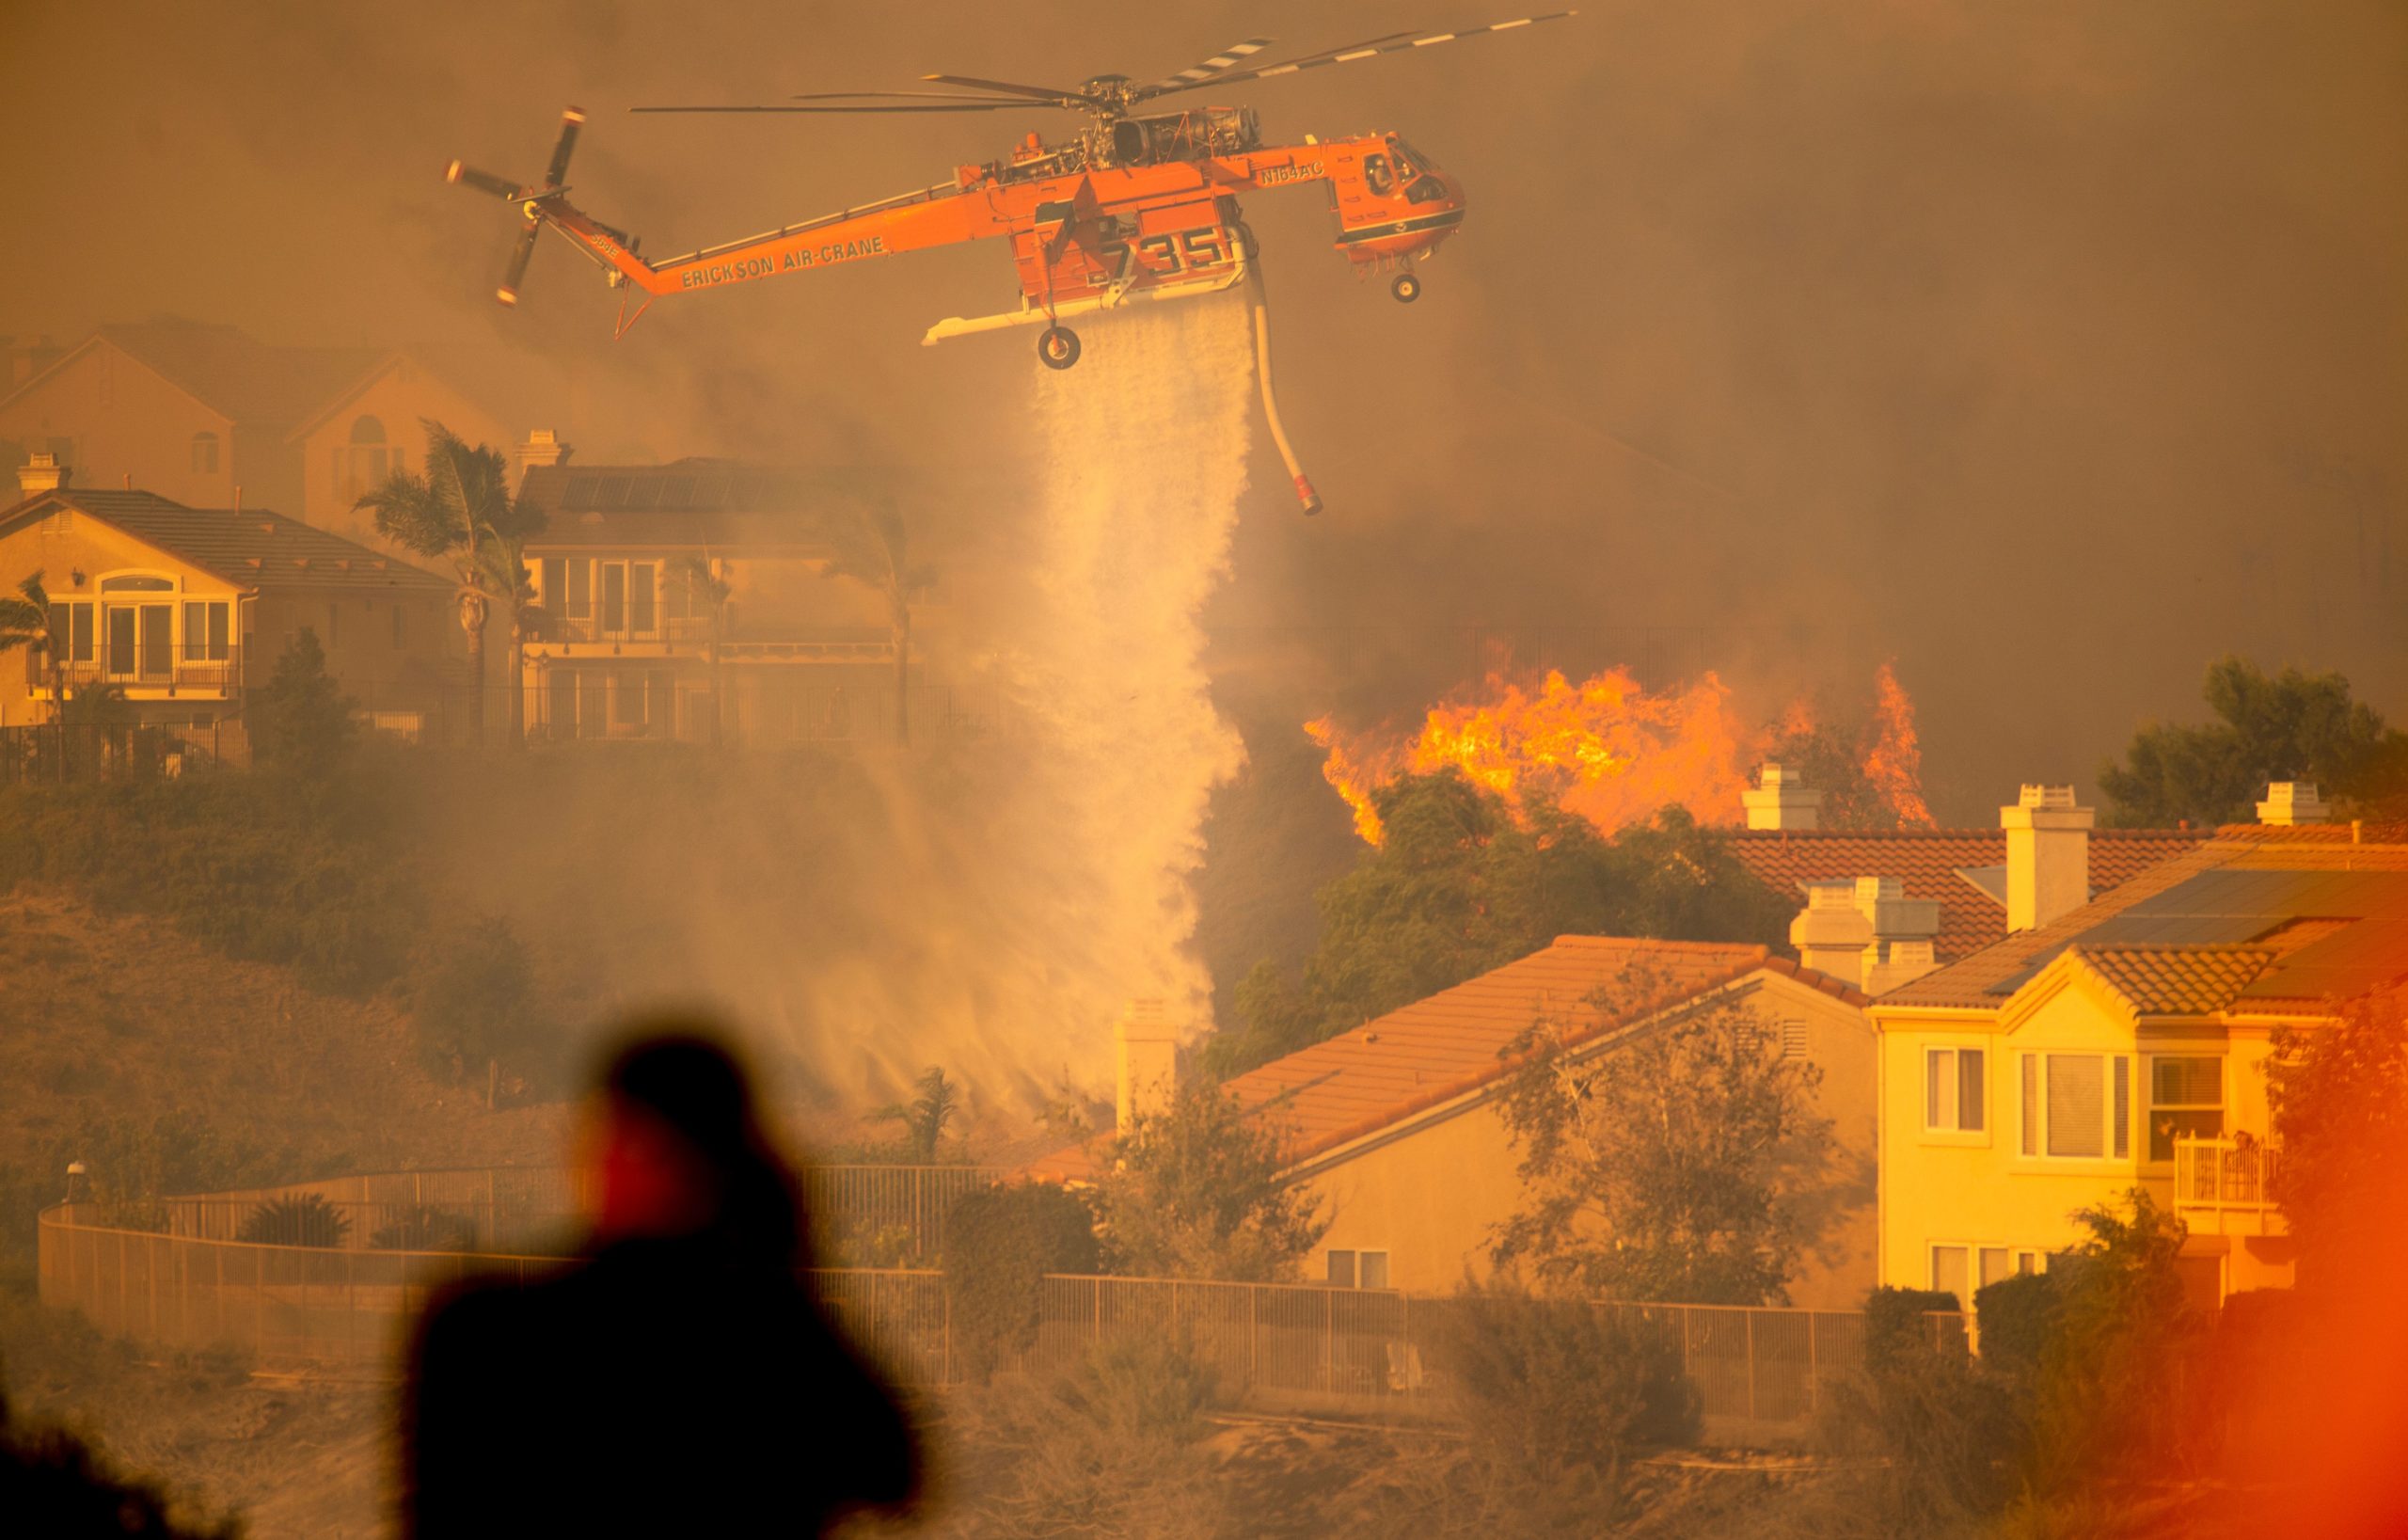 A helicopter drops water to help fight flames as the Saddleridge Fire in the Porter Ranch section of Los Angeles, California on October 11, 2019. - The fire broke out late October 10 and has scorched some 4,600 acres (1,816 hectares), and forced mandatory evacuation orders for 12,700 homes. (Photo by Josh Edelson / AFP) (Photo by JOSH EDELSON/AFP via Getty Images)